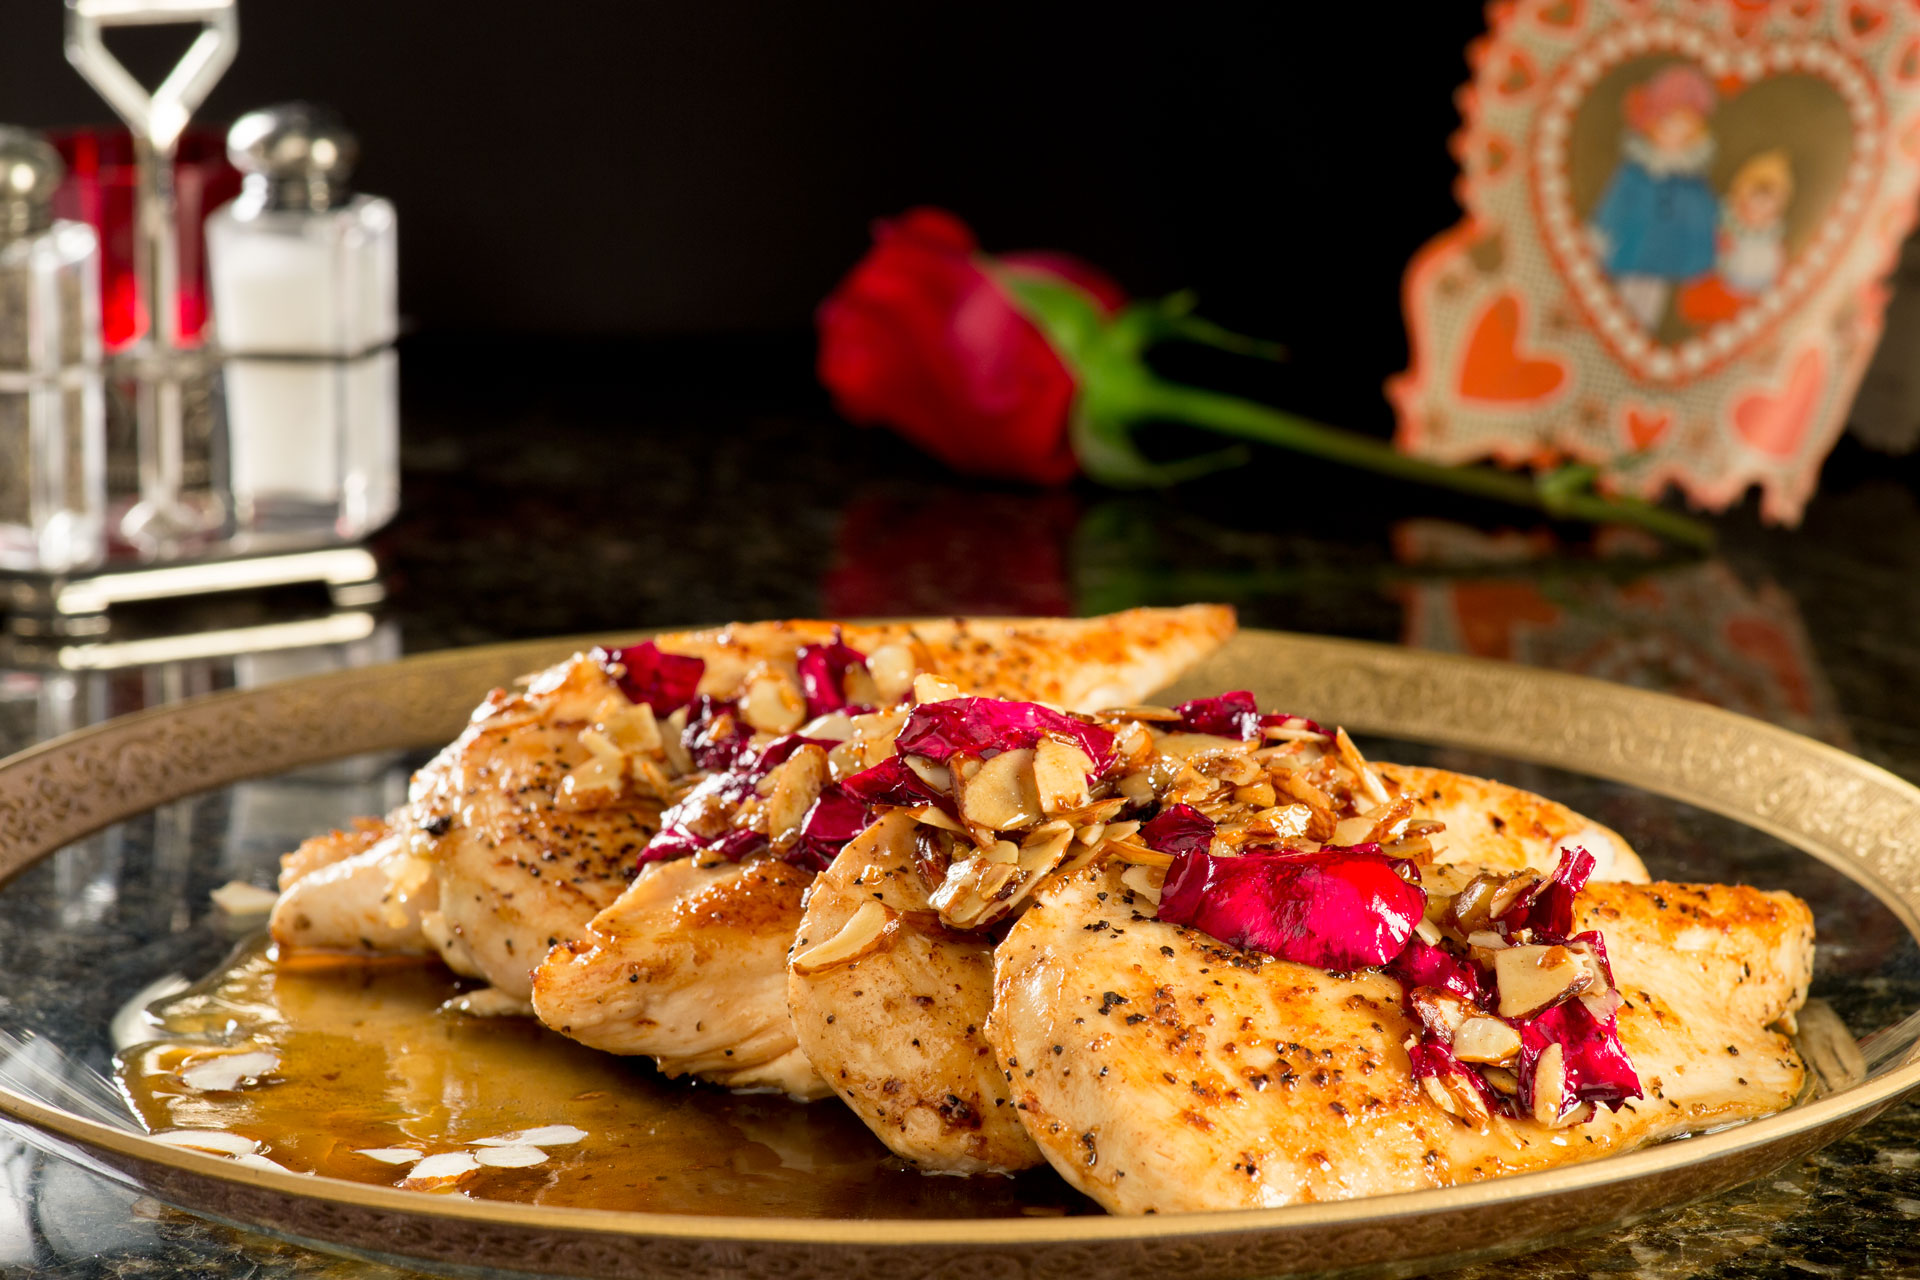 This floral-inspired sauteed chicken is made with garlic, almonds, honey and real crushed rose petals which release an aroma and natural oils to create a beautiful and deliciously unique dish.